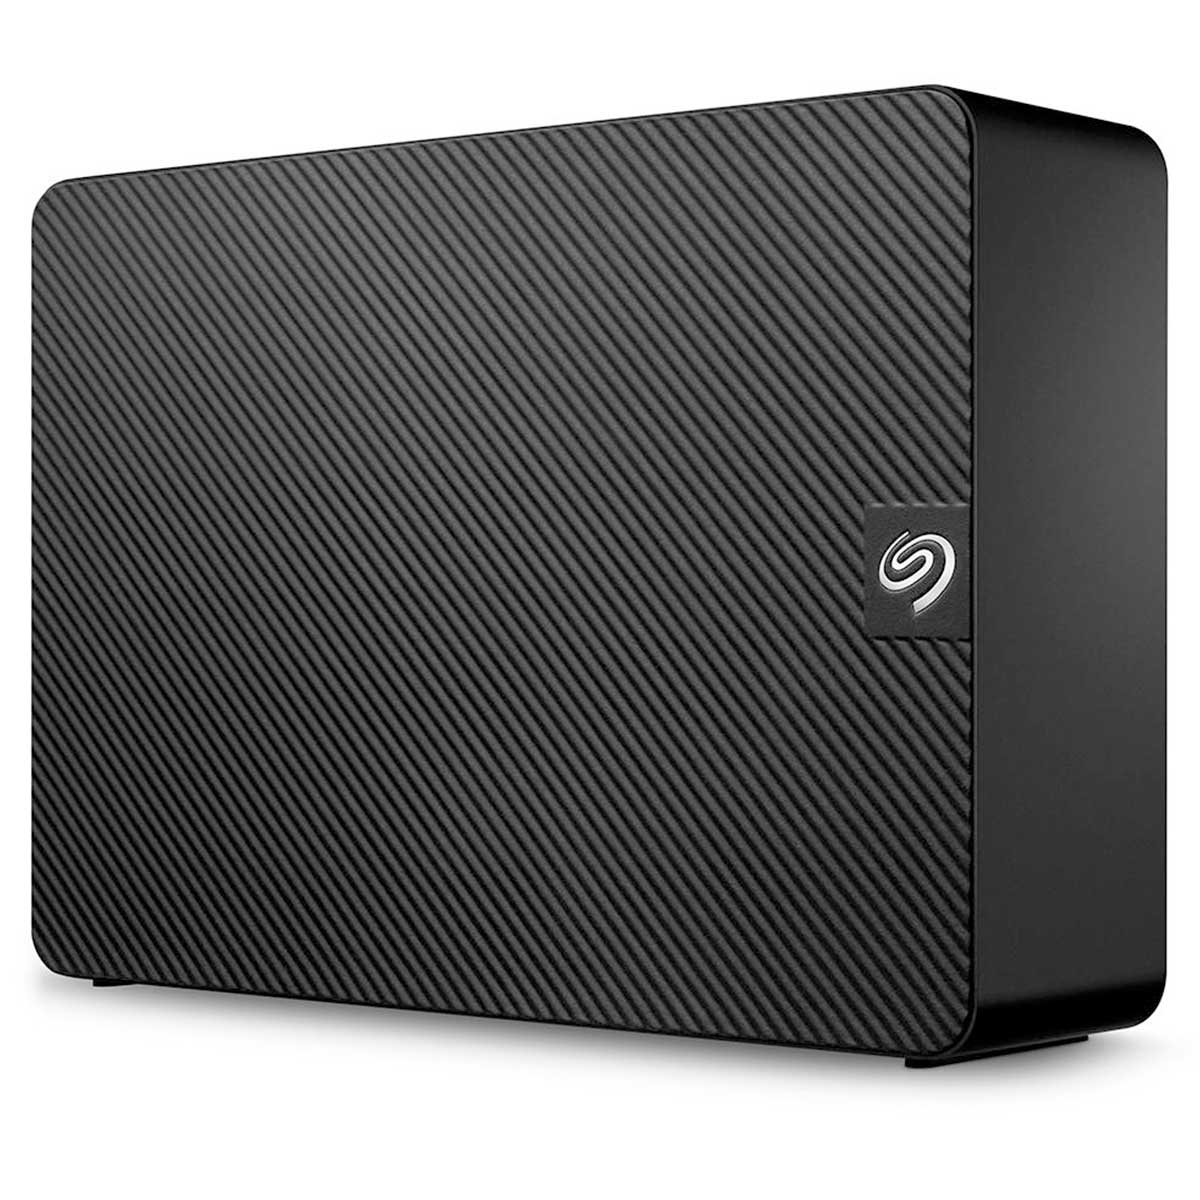 HD Externo 6TB Seagate Expansion - USB 3.0 - STKP6000400